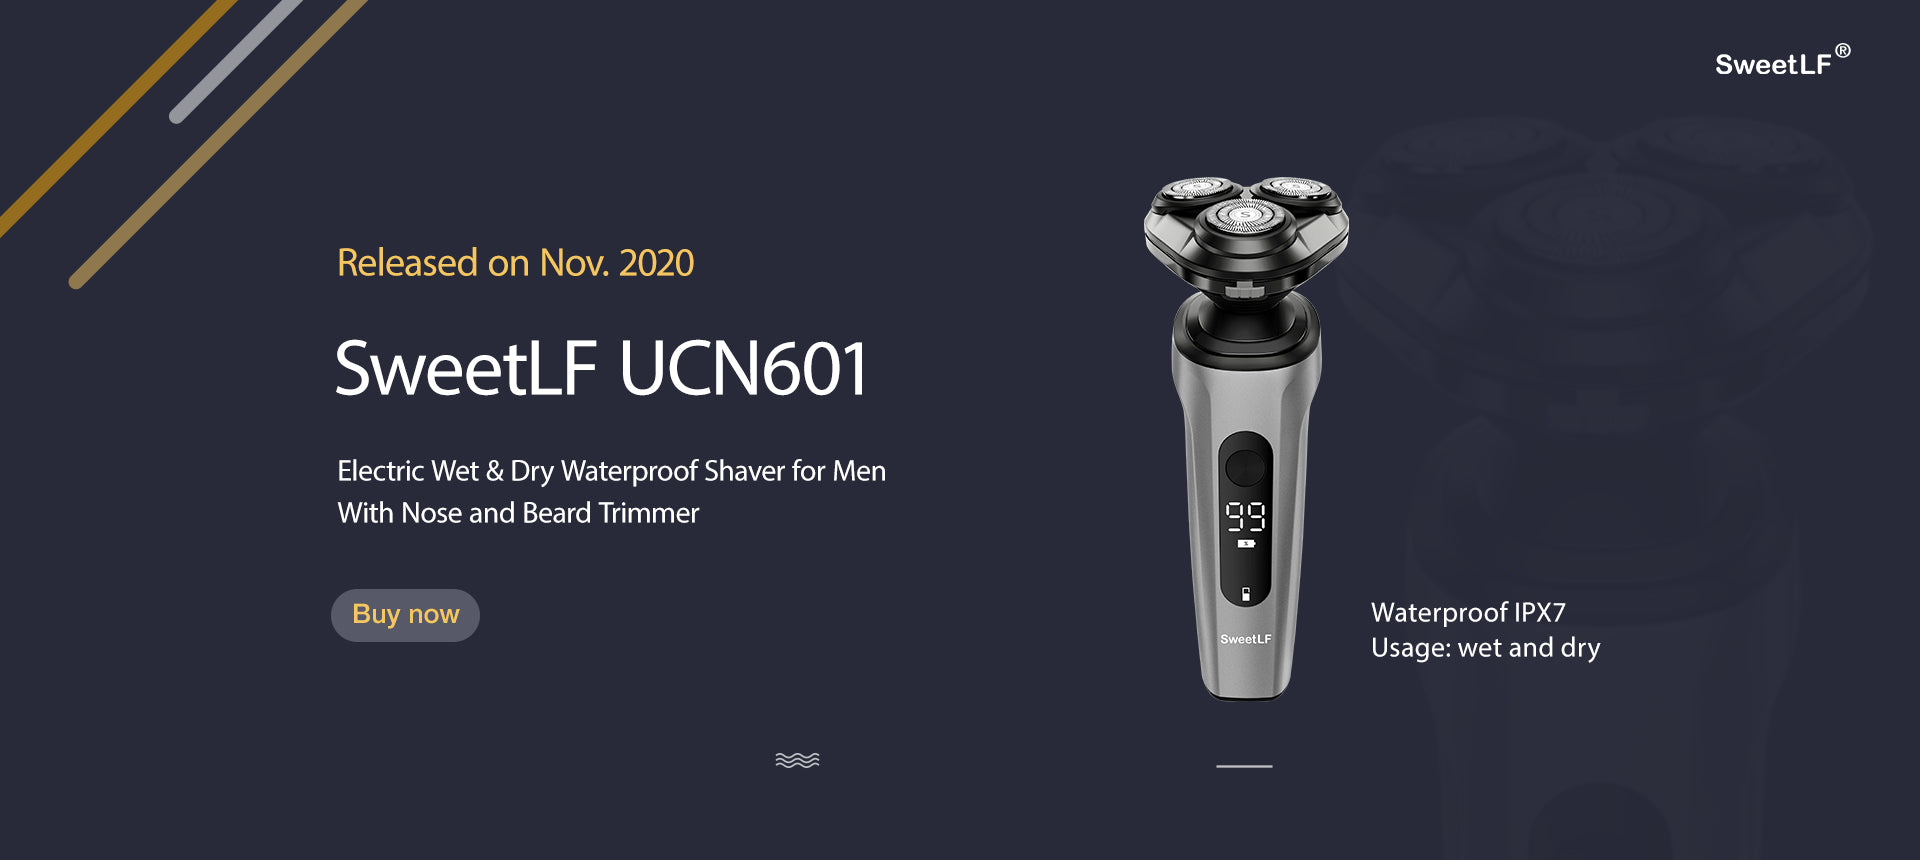 3 in 1 razor with Nose & Beard Trimmer of SweetLF